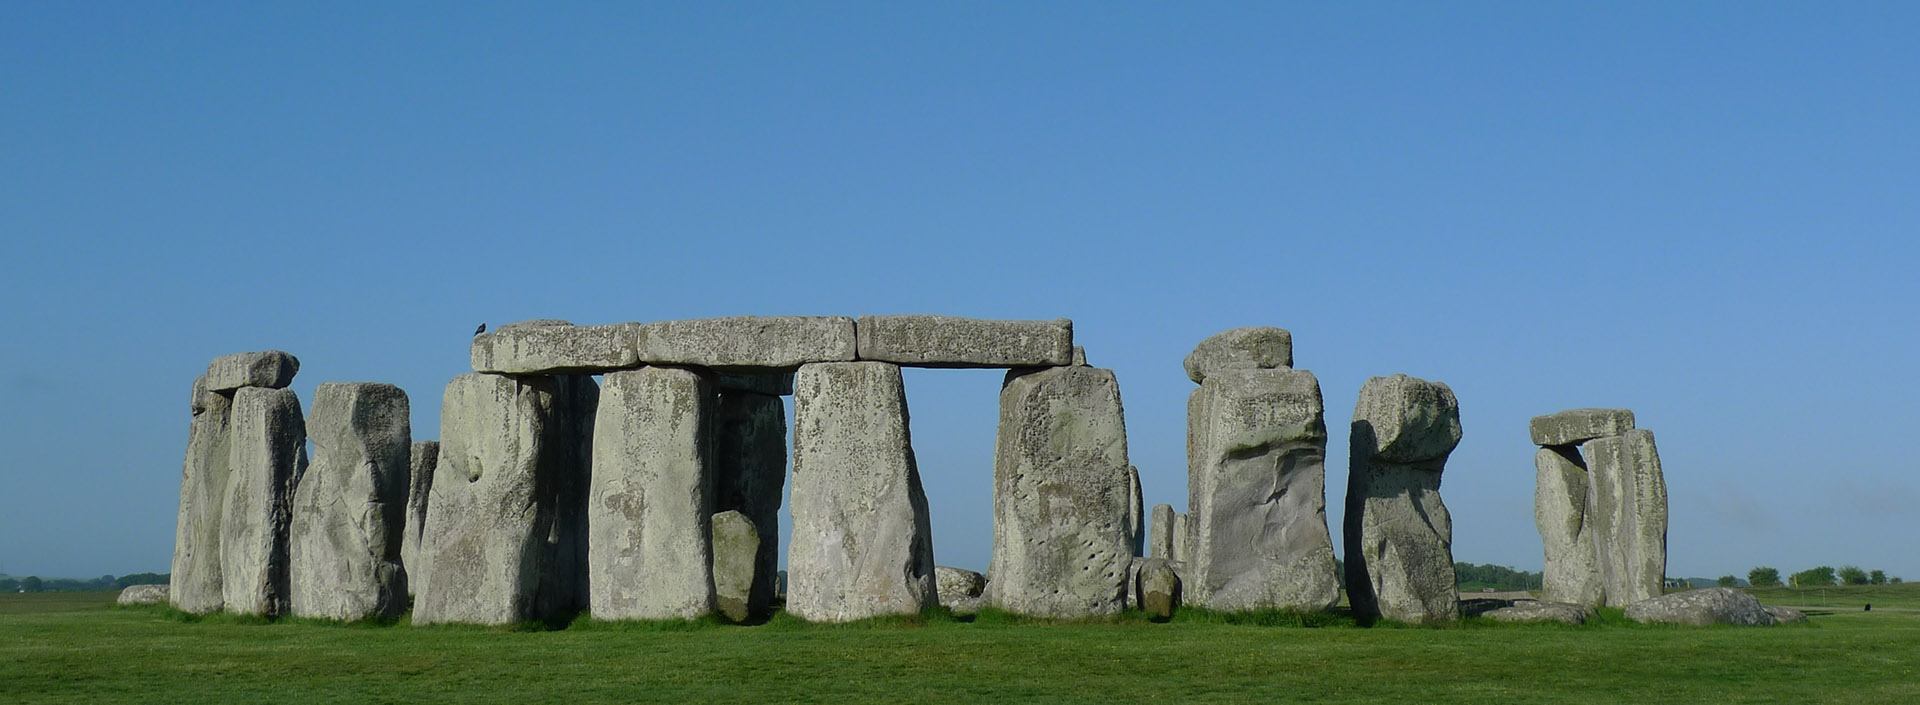 Slide 1 - Stonehenge - for software Historic Buildings, Sites and Monuments Record